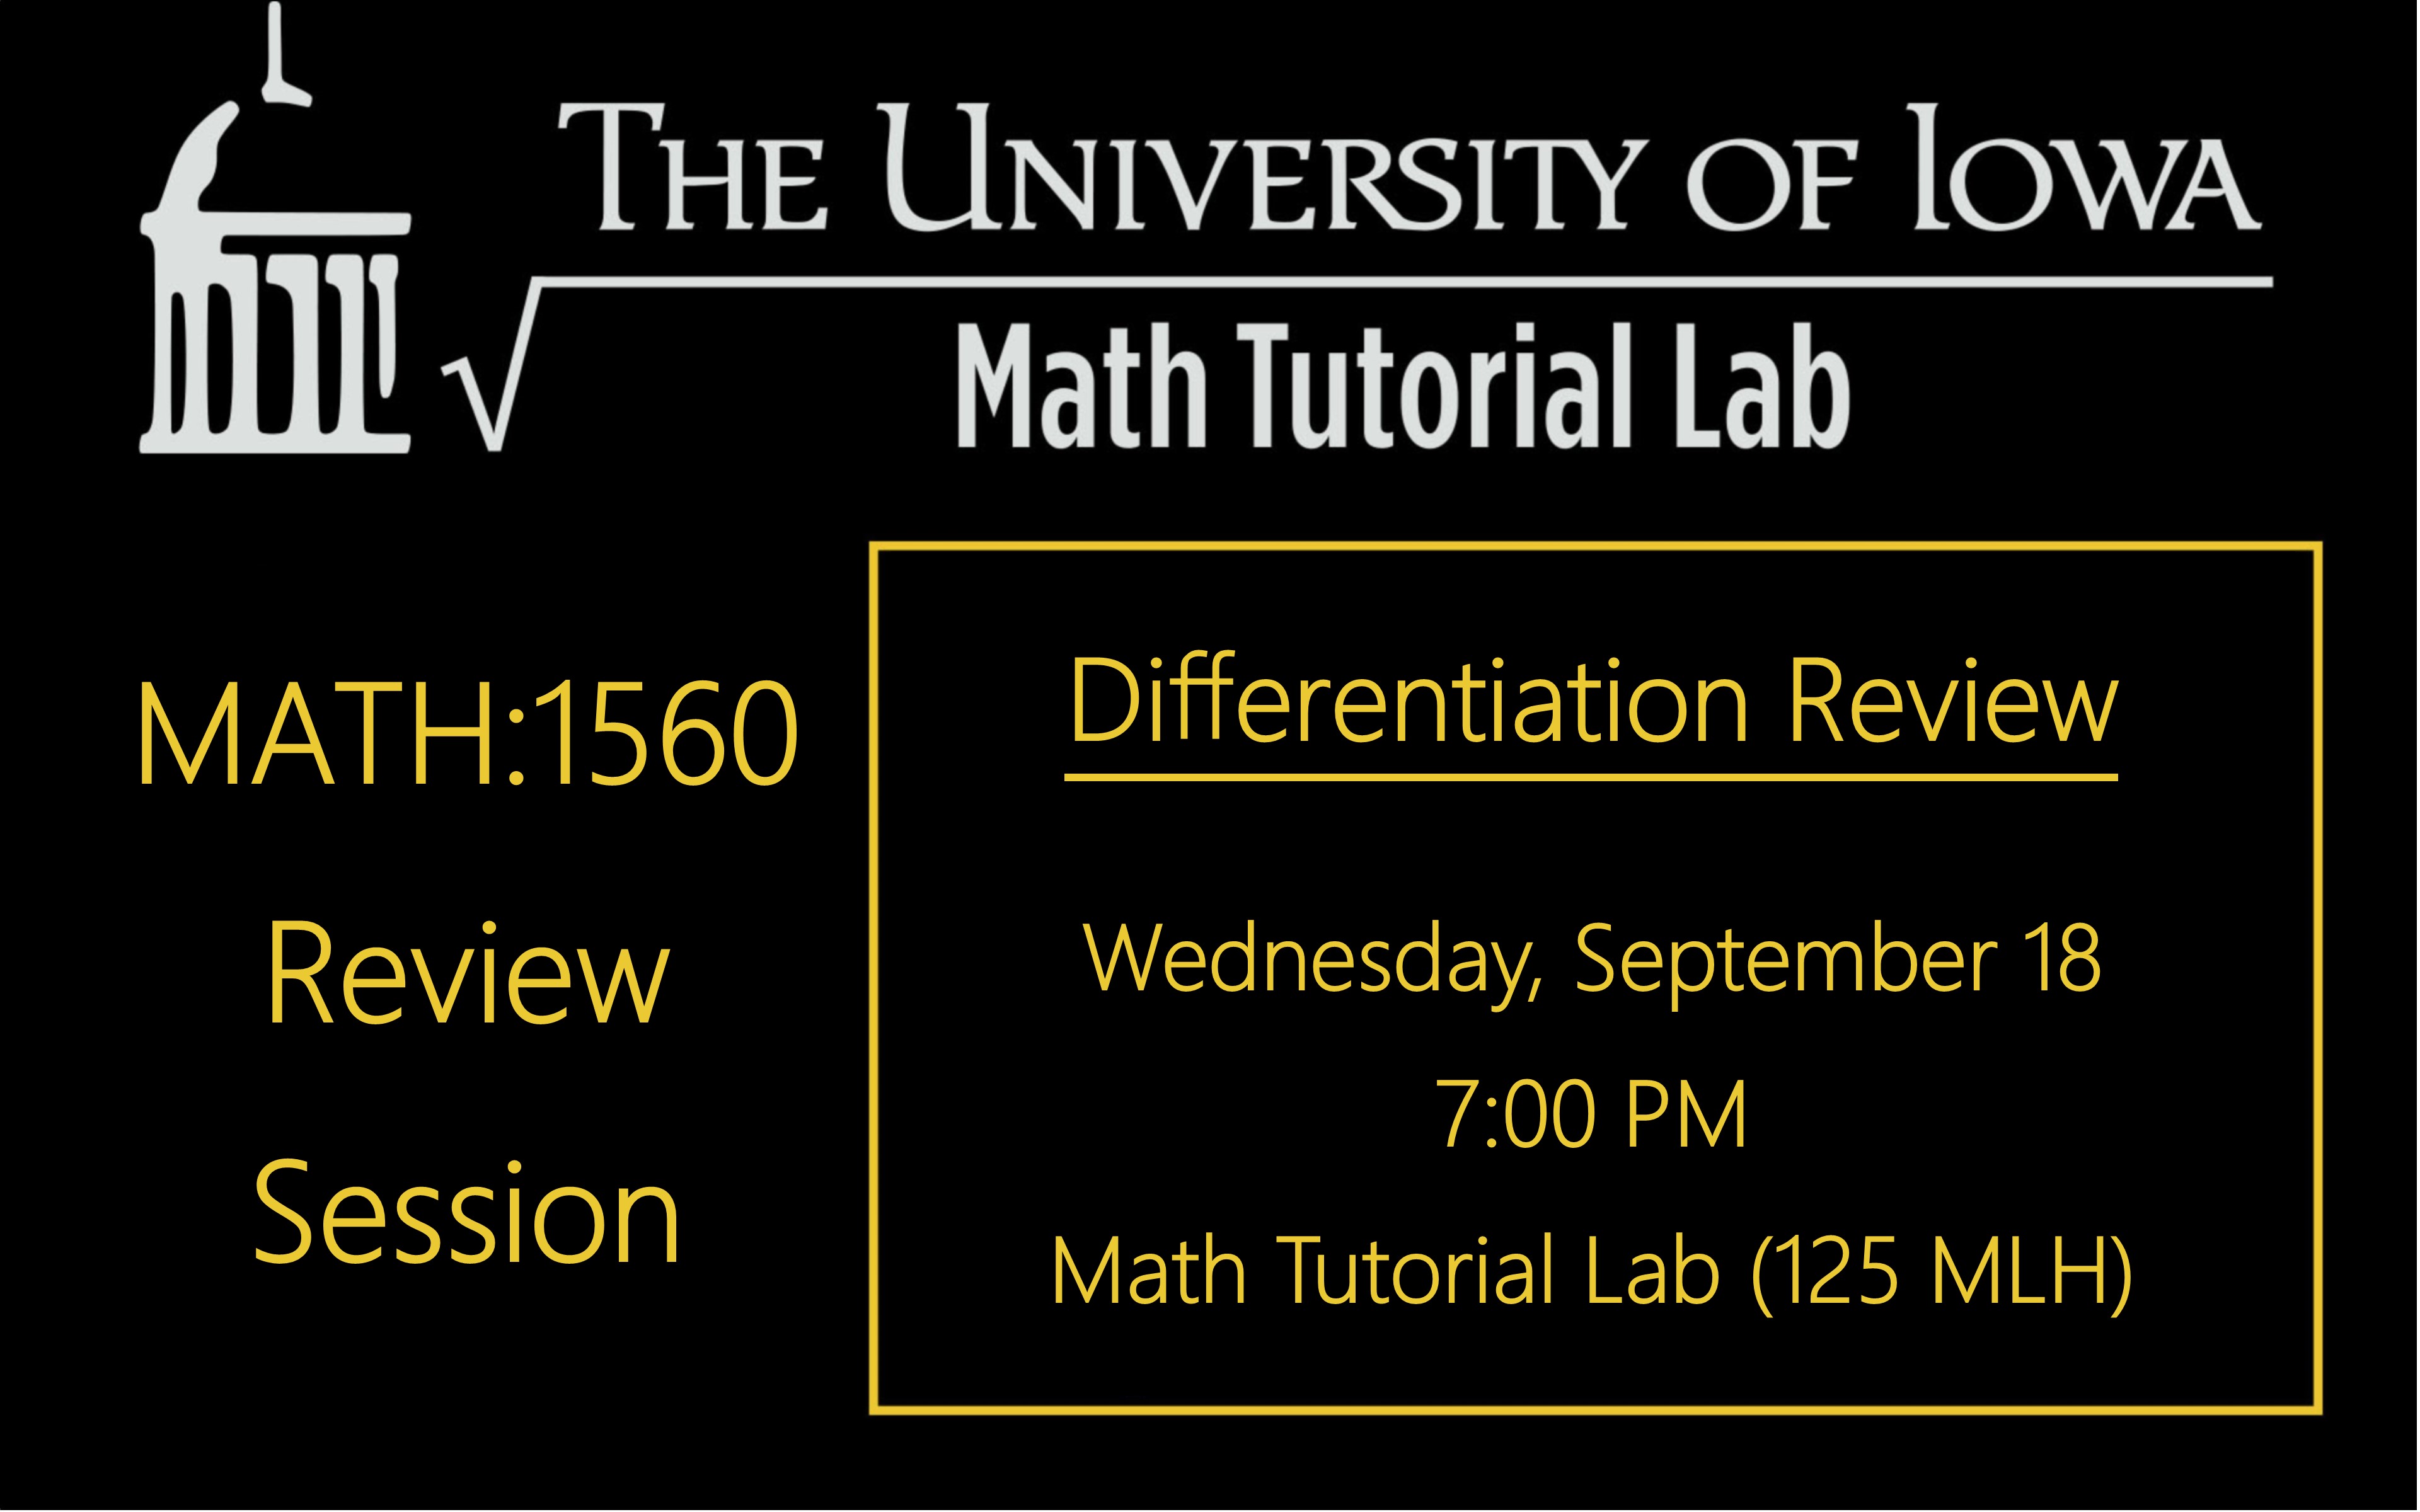 MATH:1560 Review Sessions Differentiation Review  Wednesday, September 18 7:00 PM Math Tutorial Lab (125 MLH)